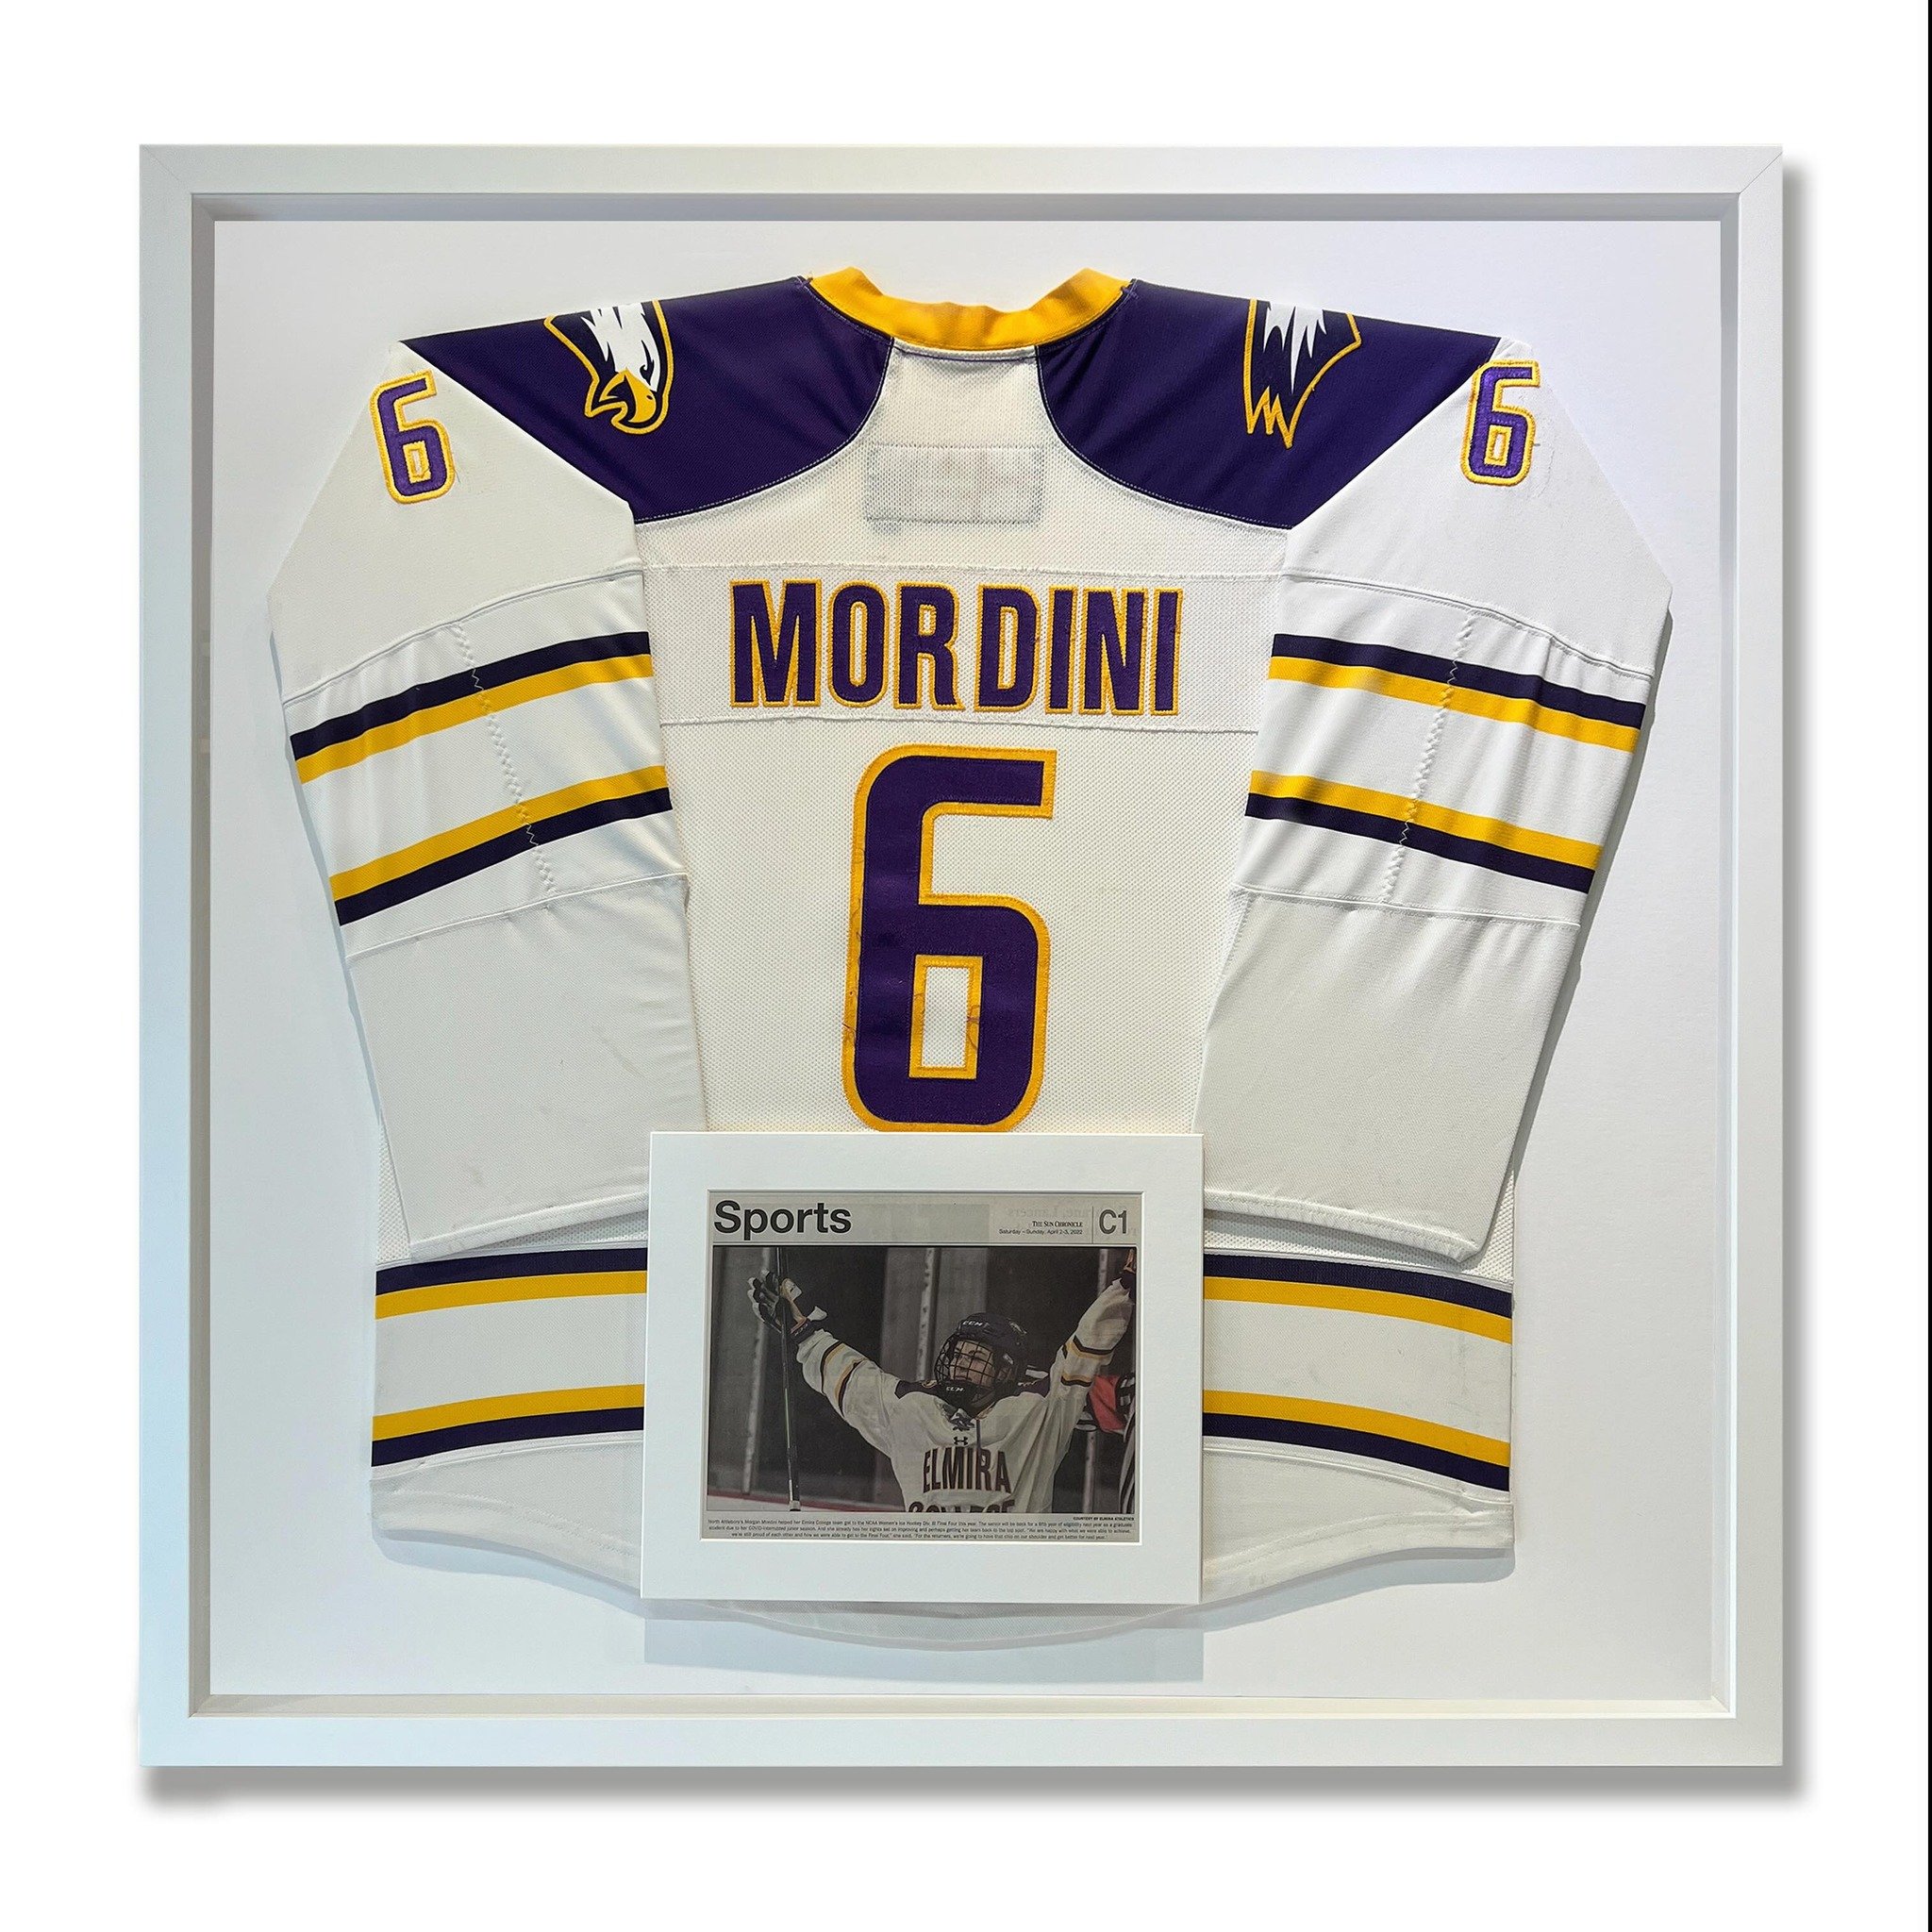 Let those colors pop! Loving the white on white for this hockey jersey with floating newspaper article. Very clean. Cool as ice. Bring us your jerseys 🏒🥅

#custompictureframing #jerseyframing #sportsjerseys #hockeyjersey #pictureframing #shadowboxf